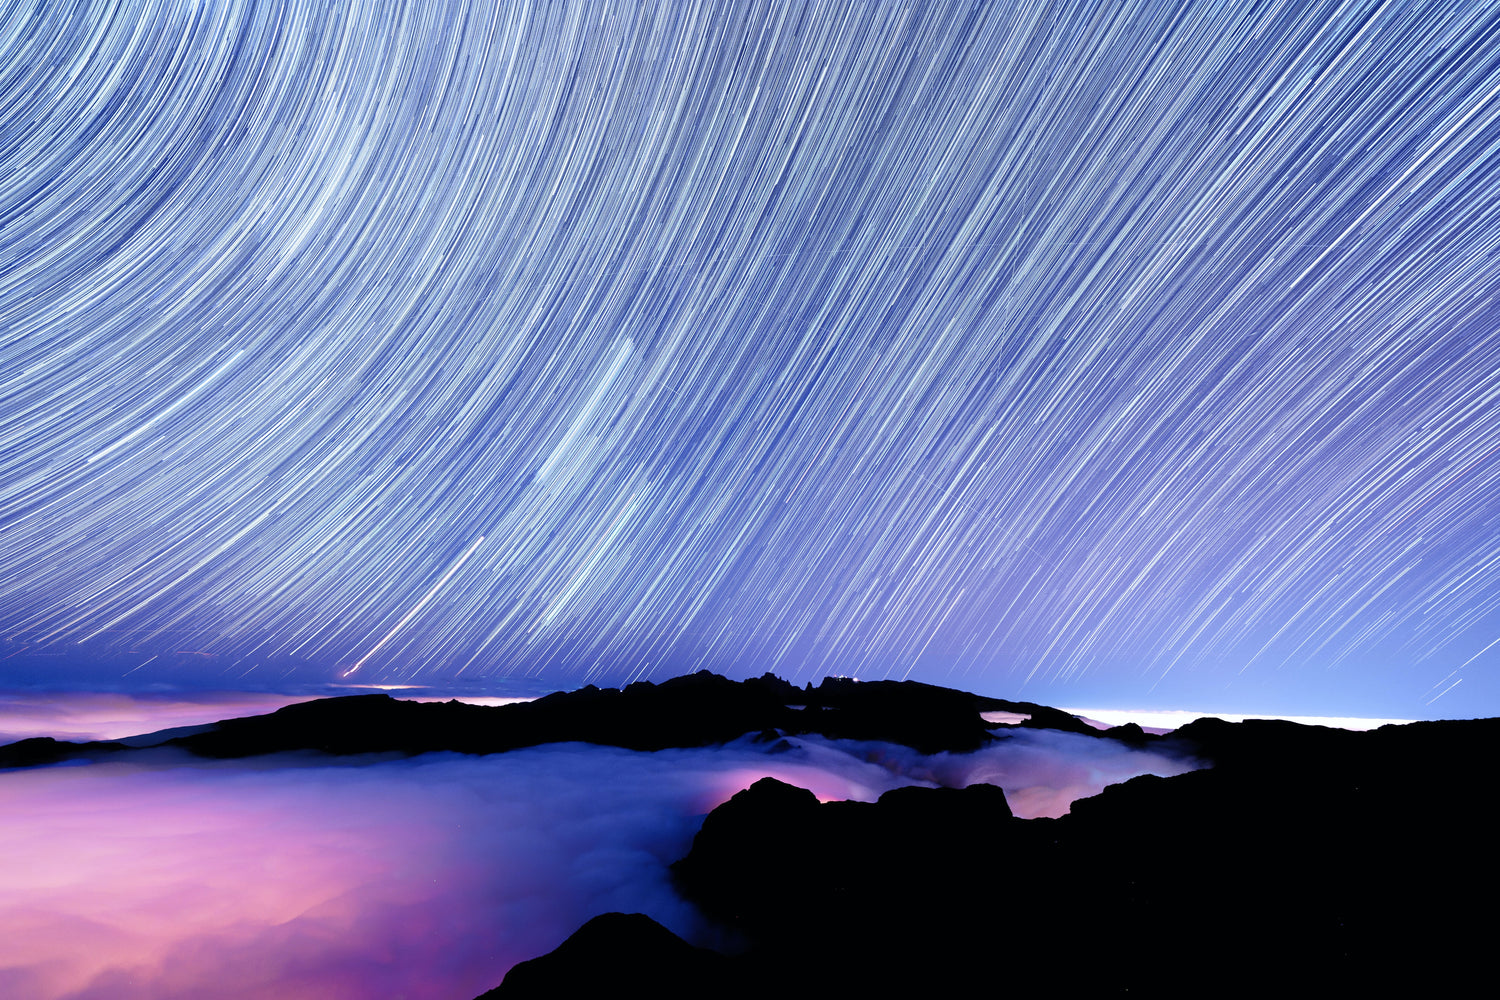 A Beginner's Guide to Astrophotography: